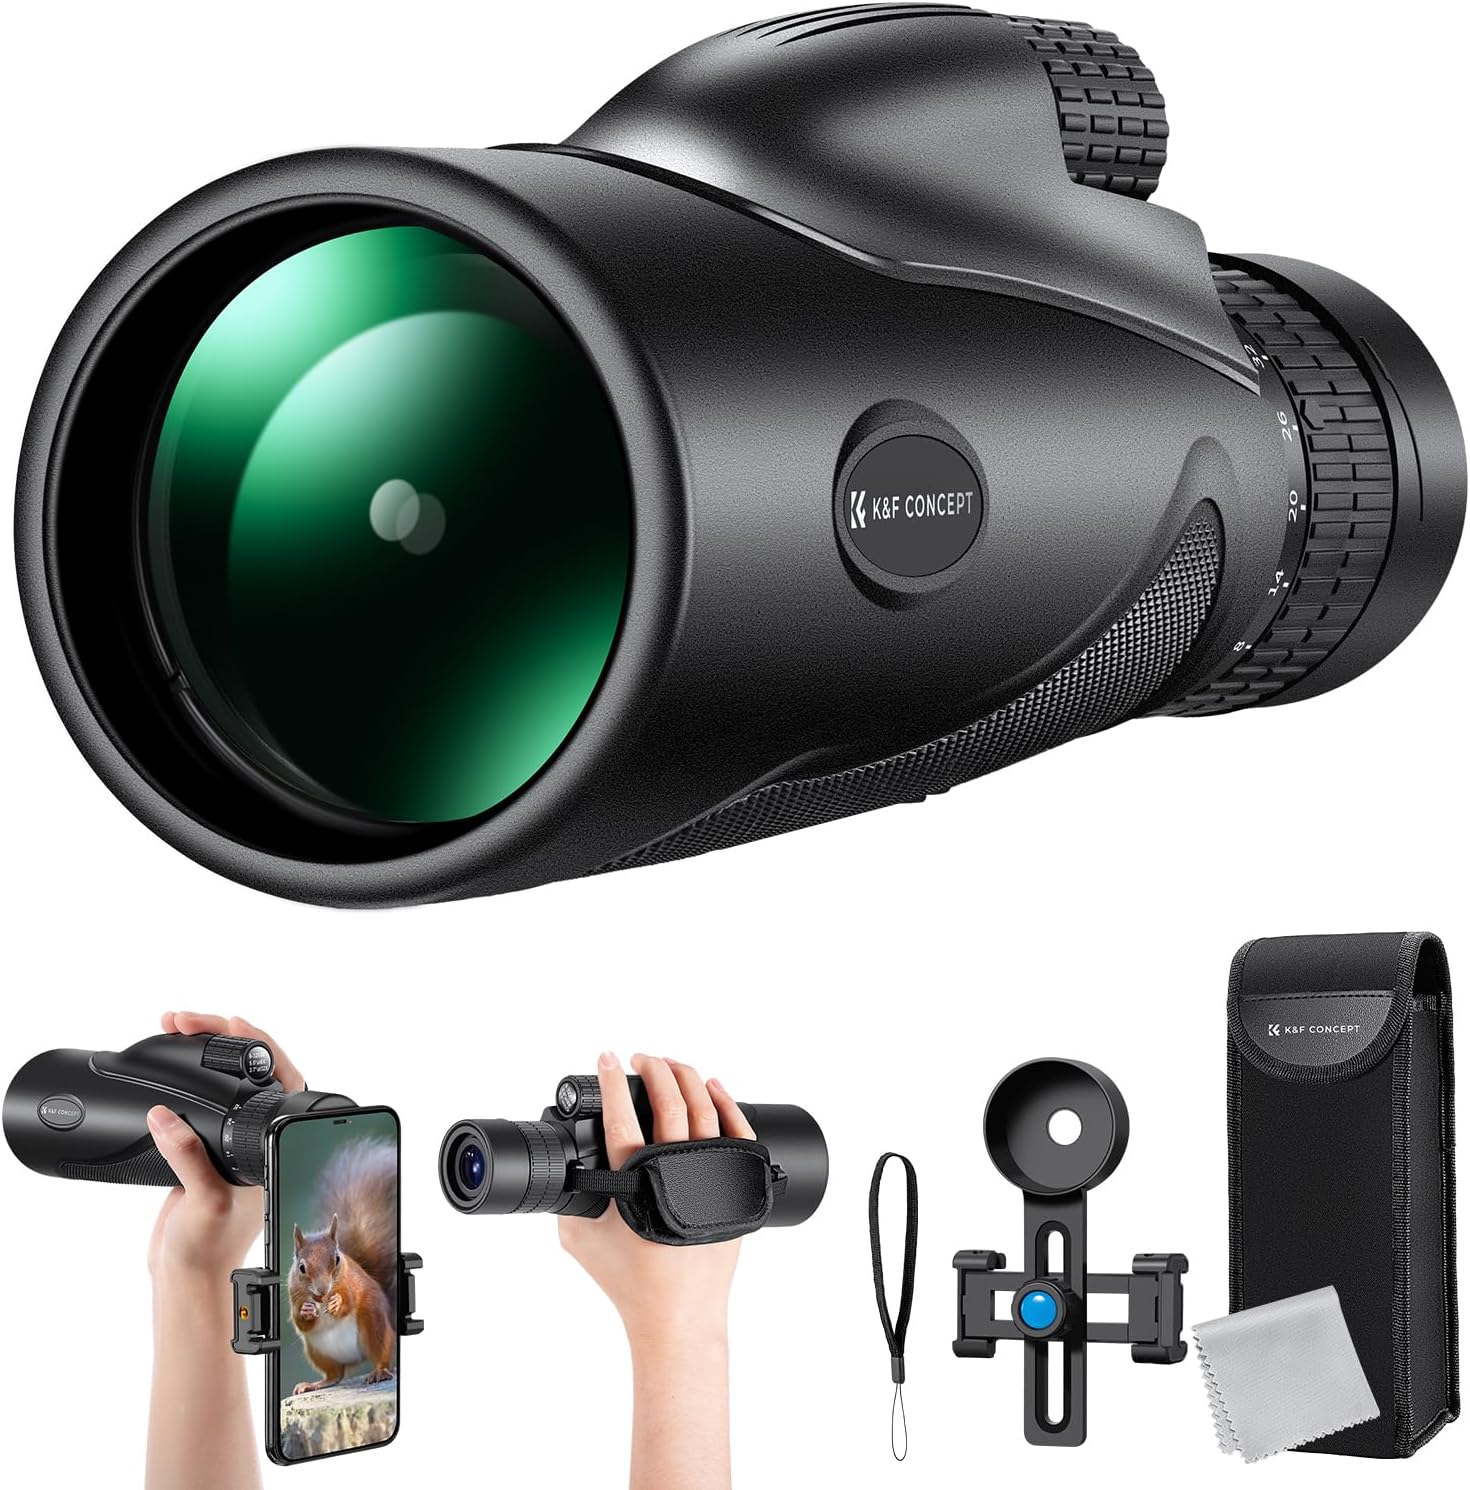 Concept 8-32X50 Zoom Monocular with Cell Phone Holder, Monocular for Adults -BAK4 Prism and FMC Lens - IP66 Waterproof - Great for Birdwatching, Hiking, Hunting, Camping, Traveling, Black